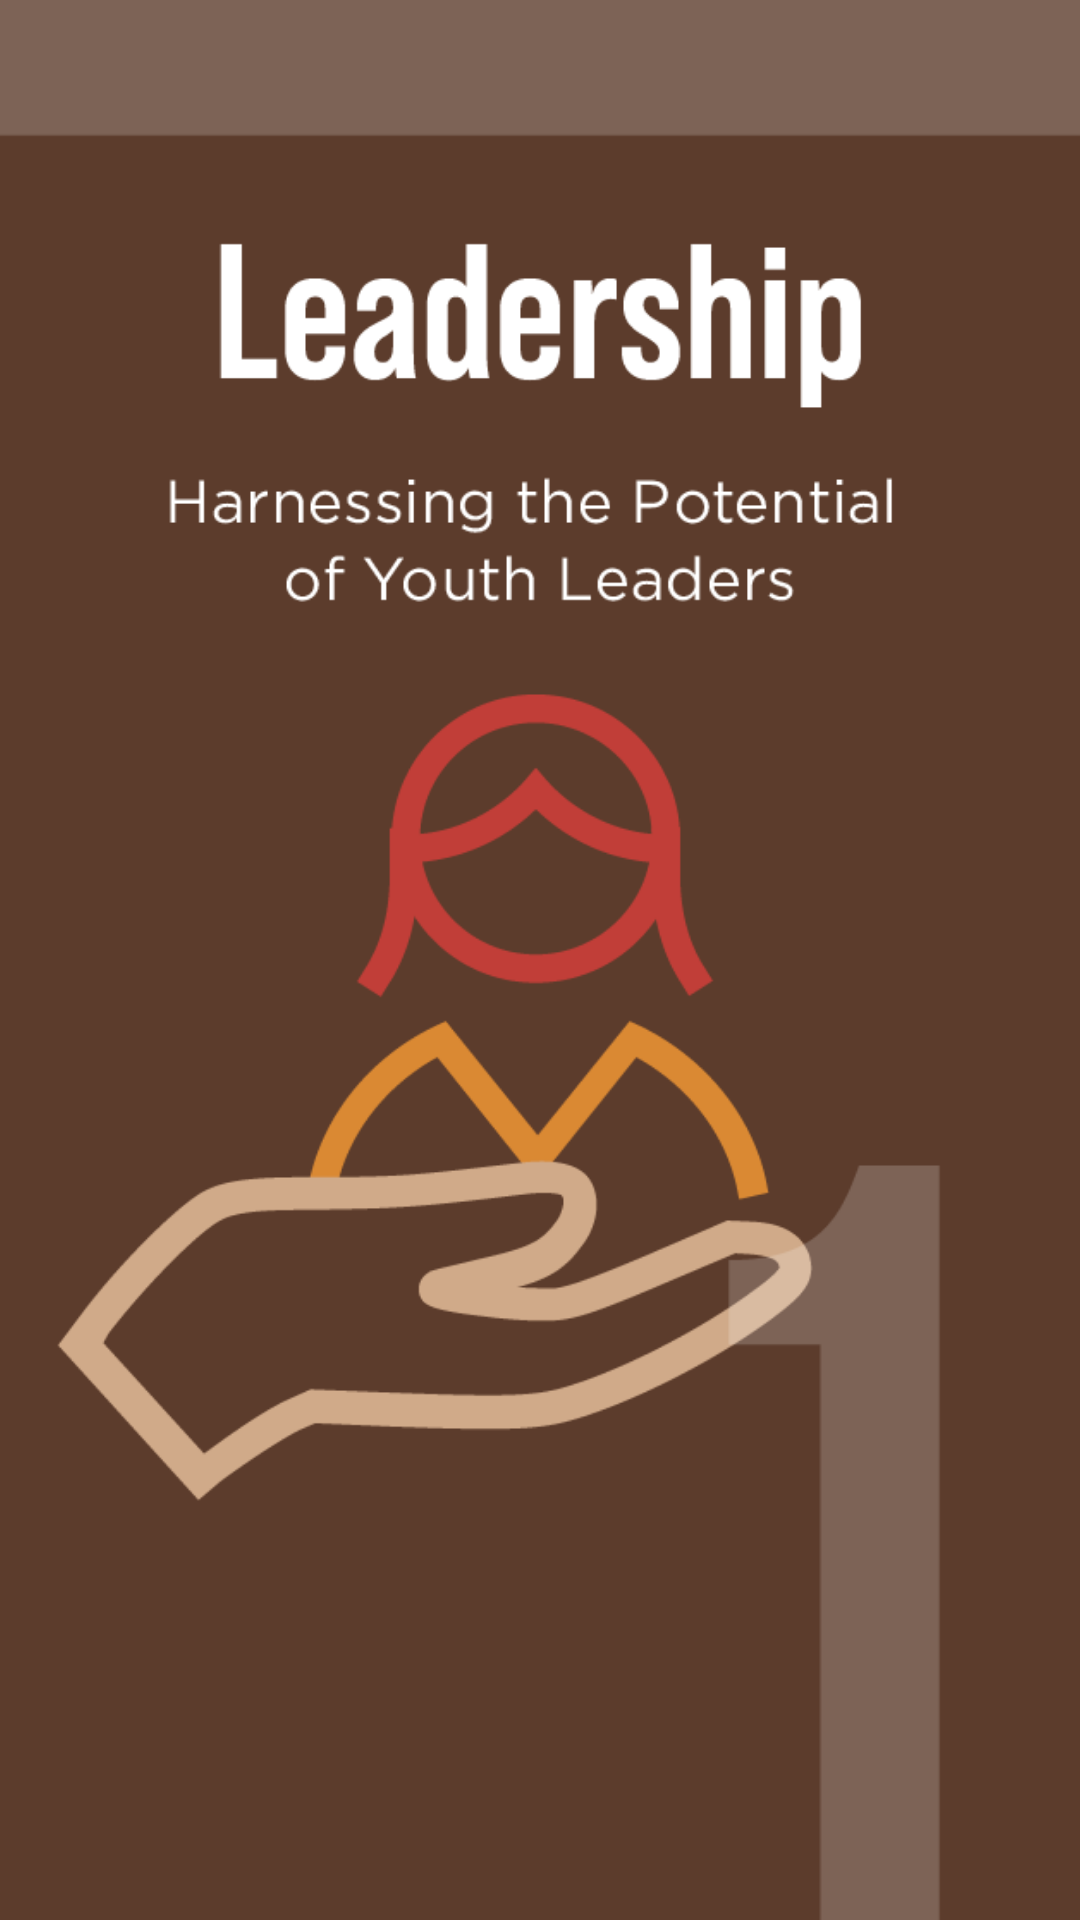 Leadership - Harnessing the potential of youth leaders